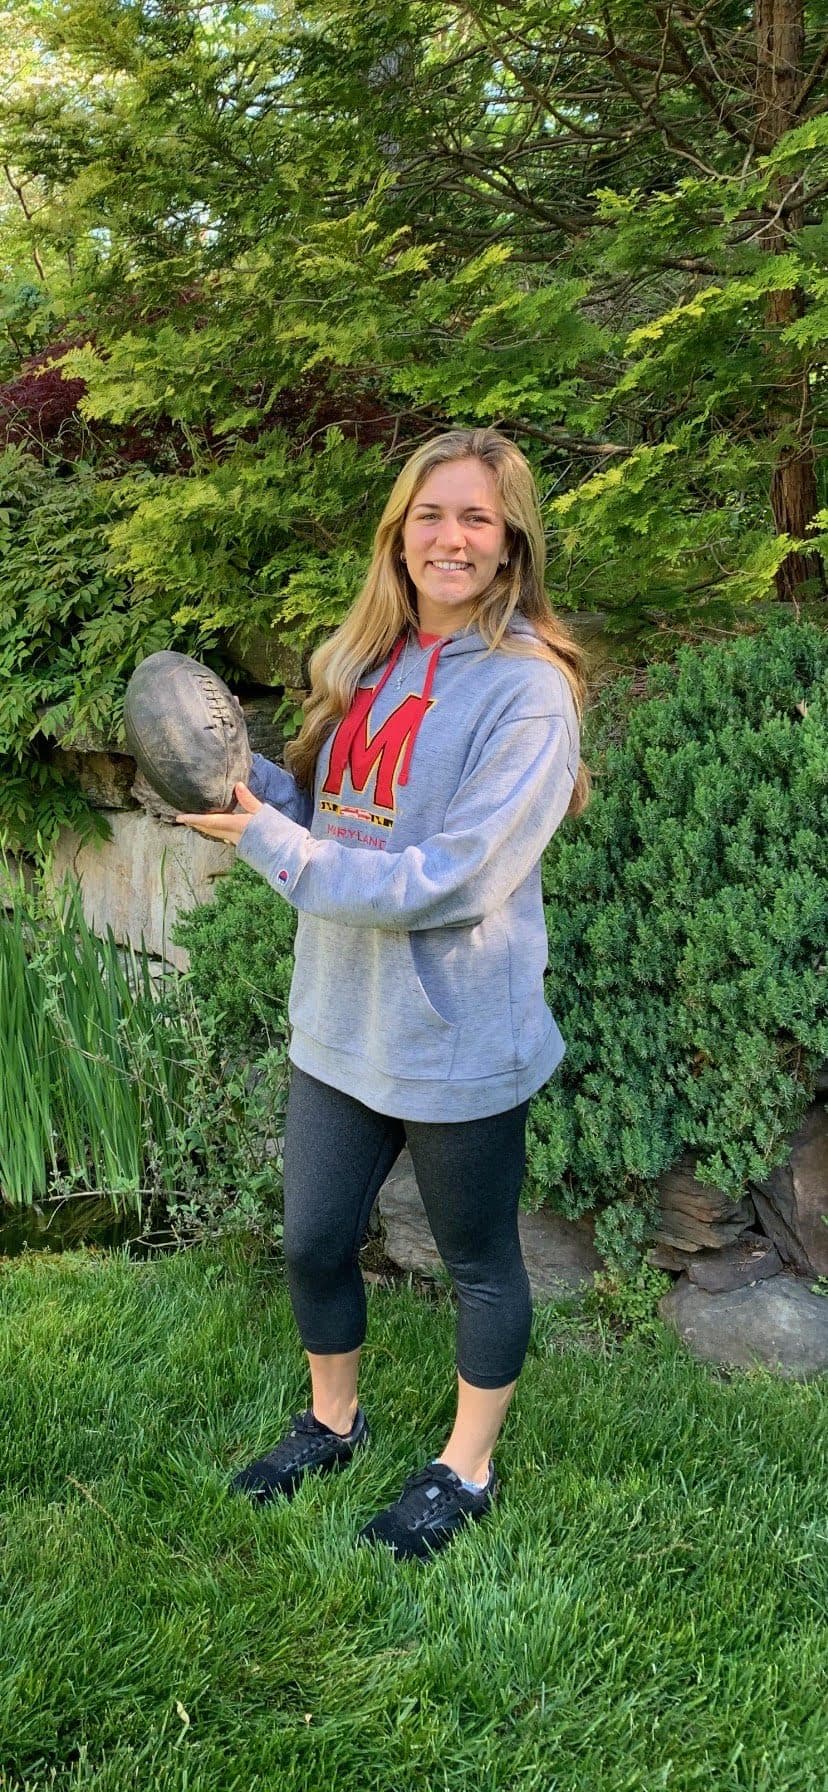 Kelly holds a football given to Reuben by his classmate and later university President Harry Clifton “Curley” Byrd.